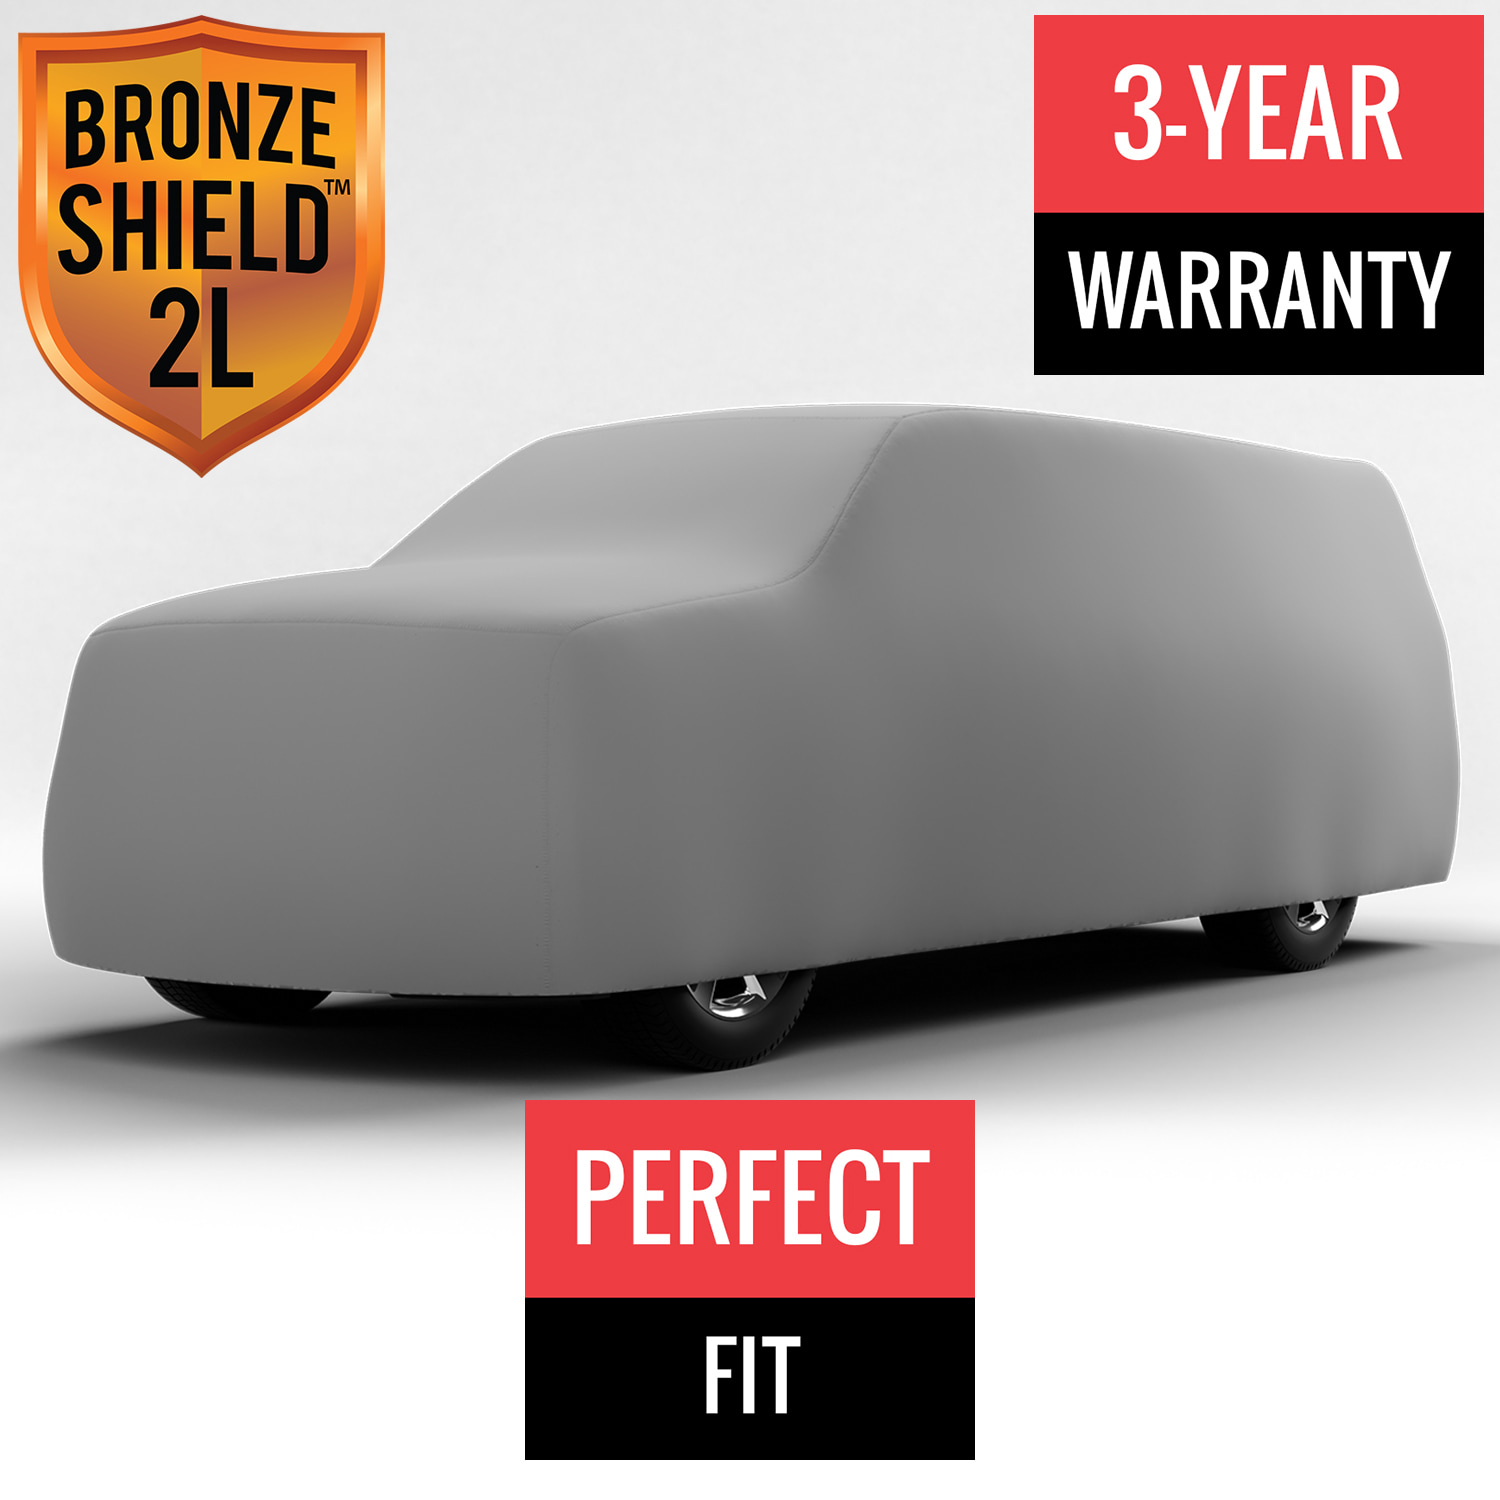 Bronze Shield 2L - Car Cover for GMC C1500 1998 Regular Cab Pickup 6.5 Feet Bed with Camper Shell